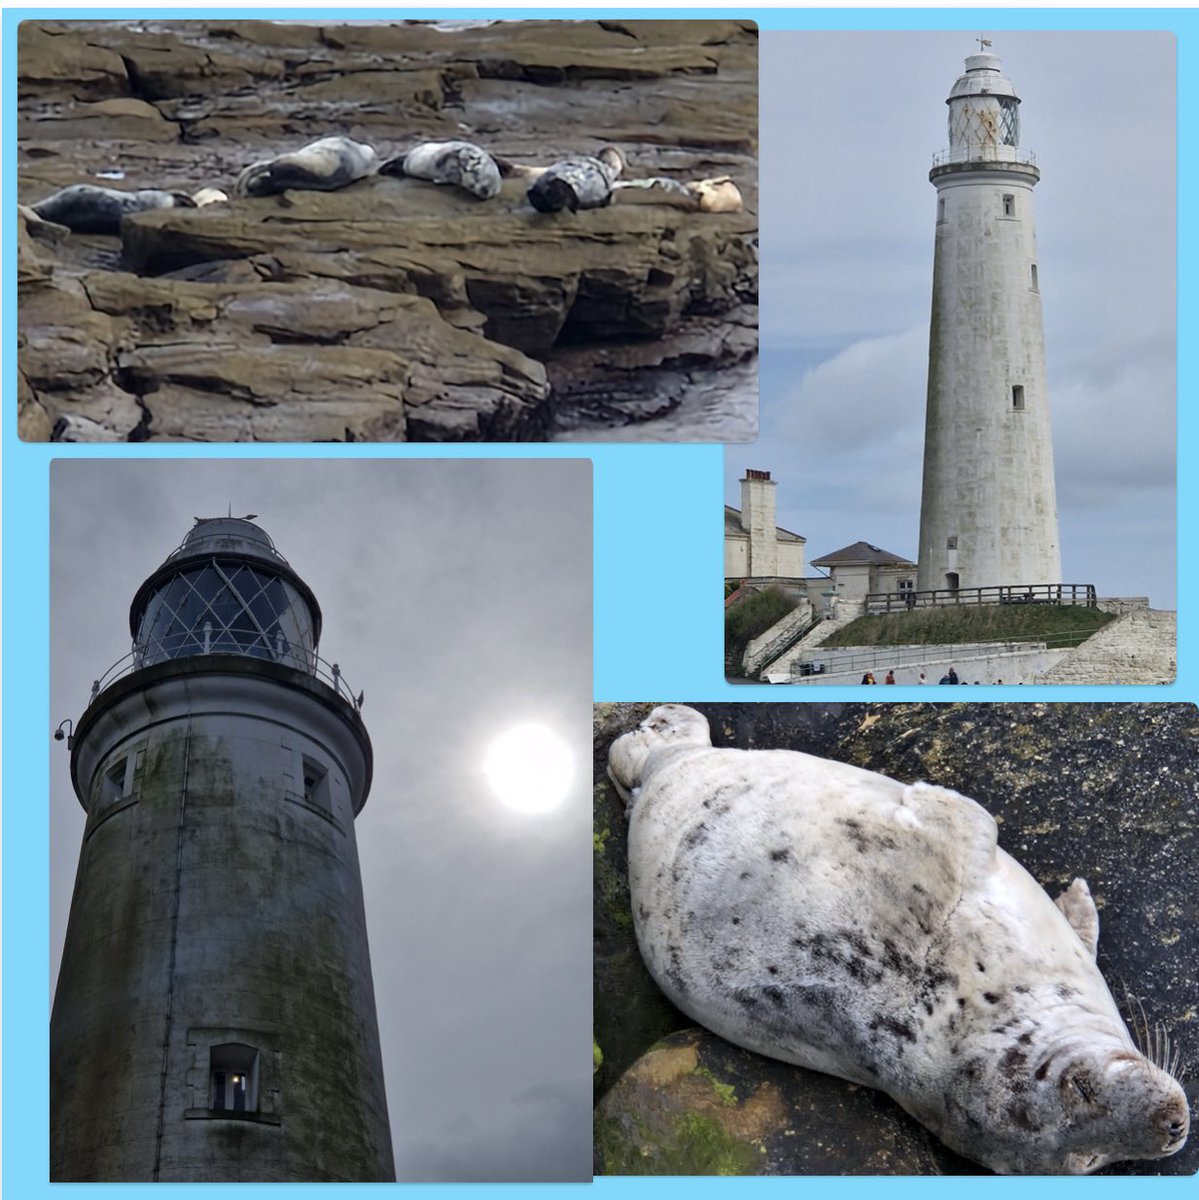 #GoodAfternoon  #TwitterFriends  had lovely time at the coast went across to #lighthouse  #StMarysIsland & was delighted that the seals were there. A young one was just below the wall oblivious to all the attention it was getting. It really made my day. #HappyThursday  #DayOut